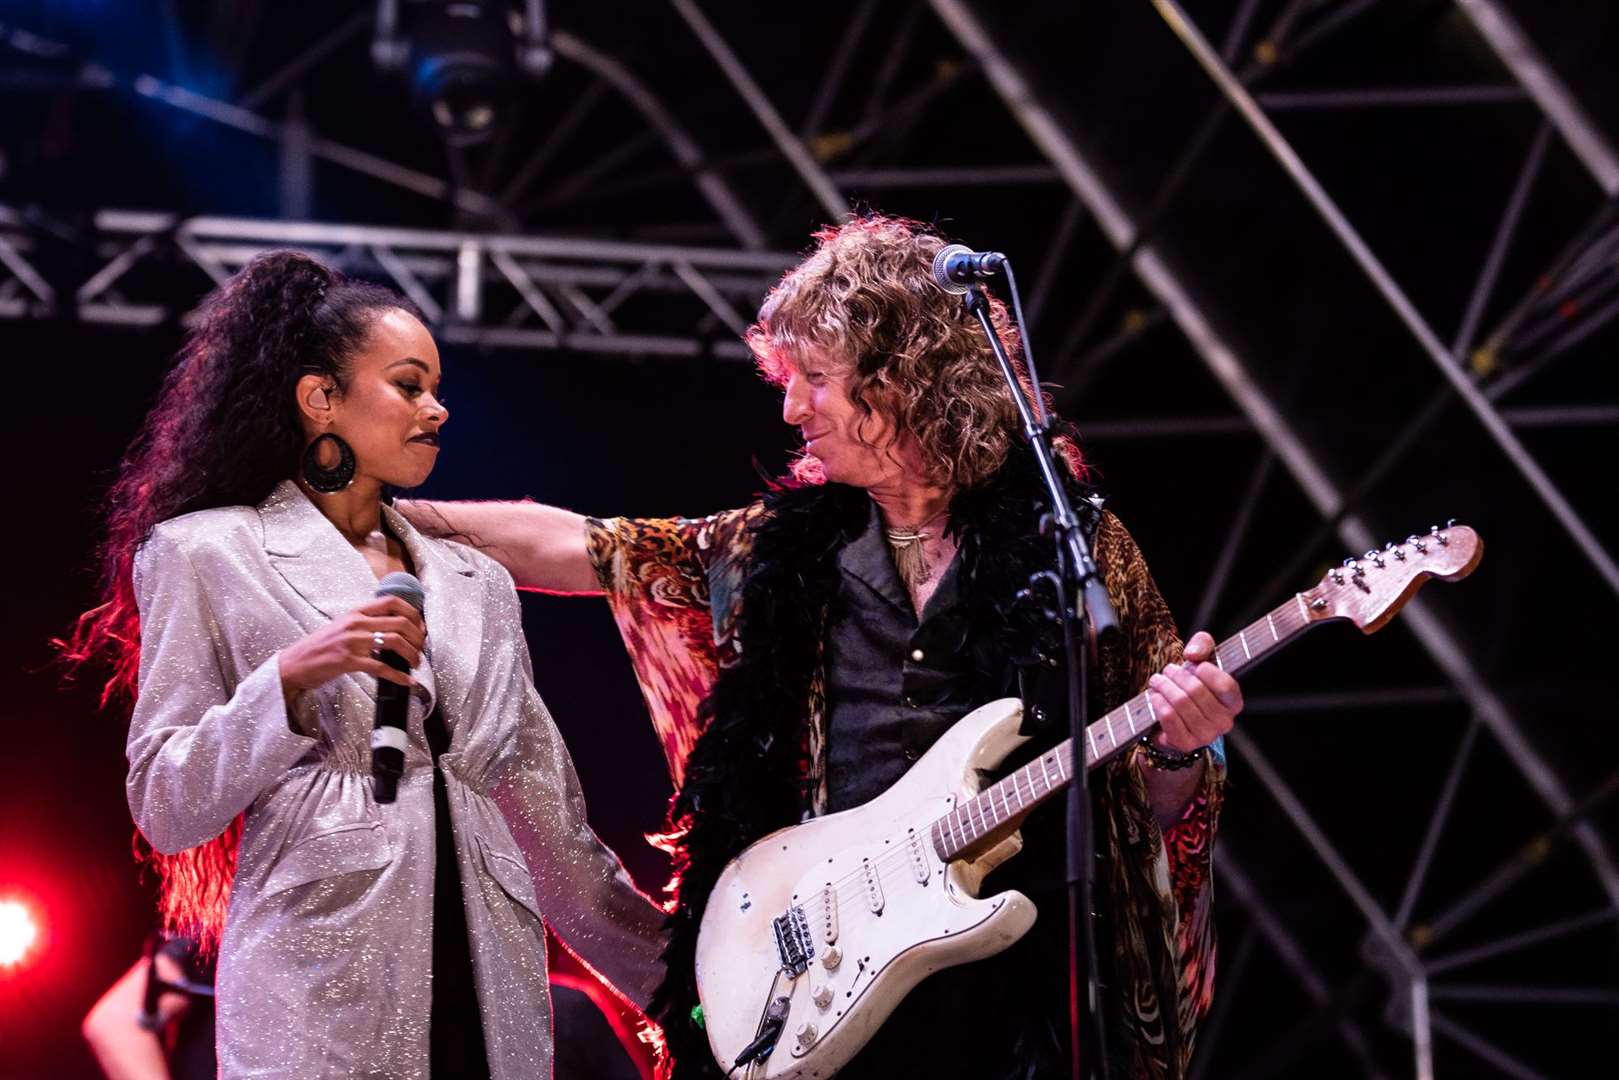 The Brand New Heavies perform at Rochester Castle Concerts